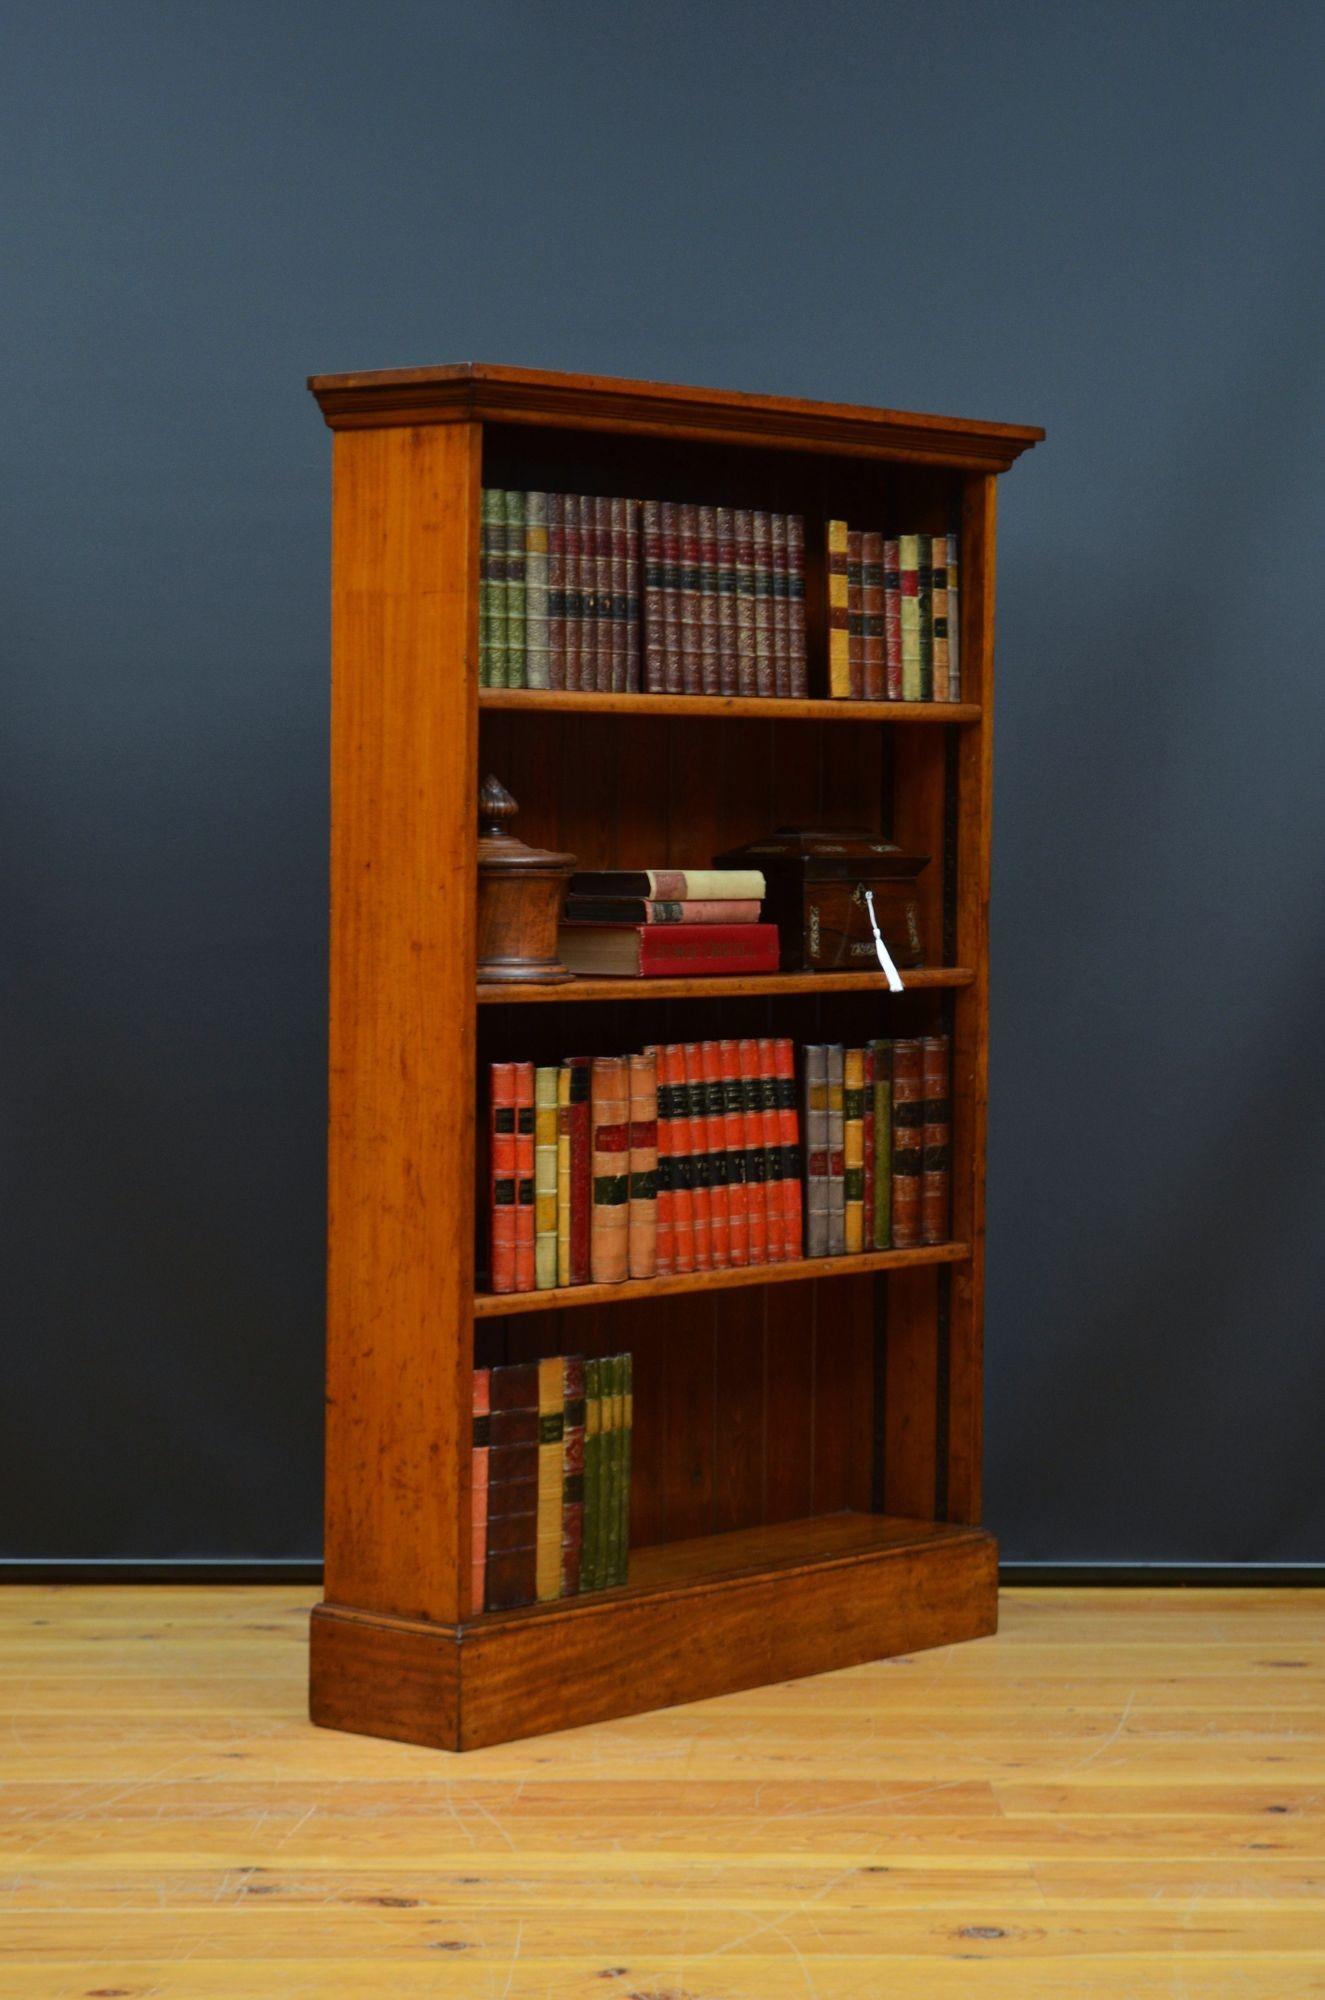 K0623 Early 20th century, solid mahogany open bookcase of unusually narrow proportions, having figured mahogany, oversailing top above three solid mahogany shelves and solid mahogany sides, all standing on plinth base. This antique bookcase is in